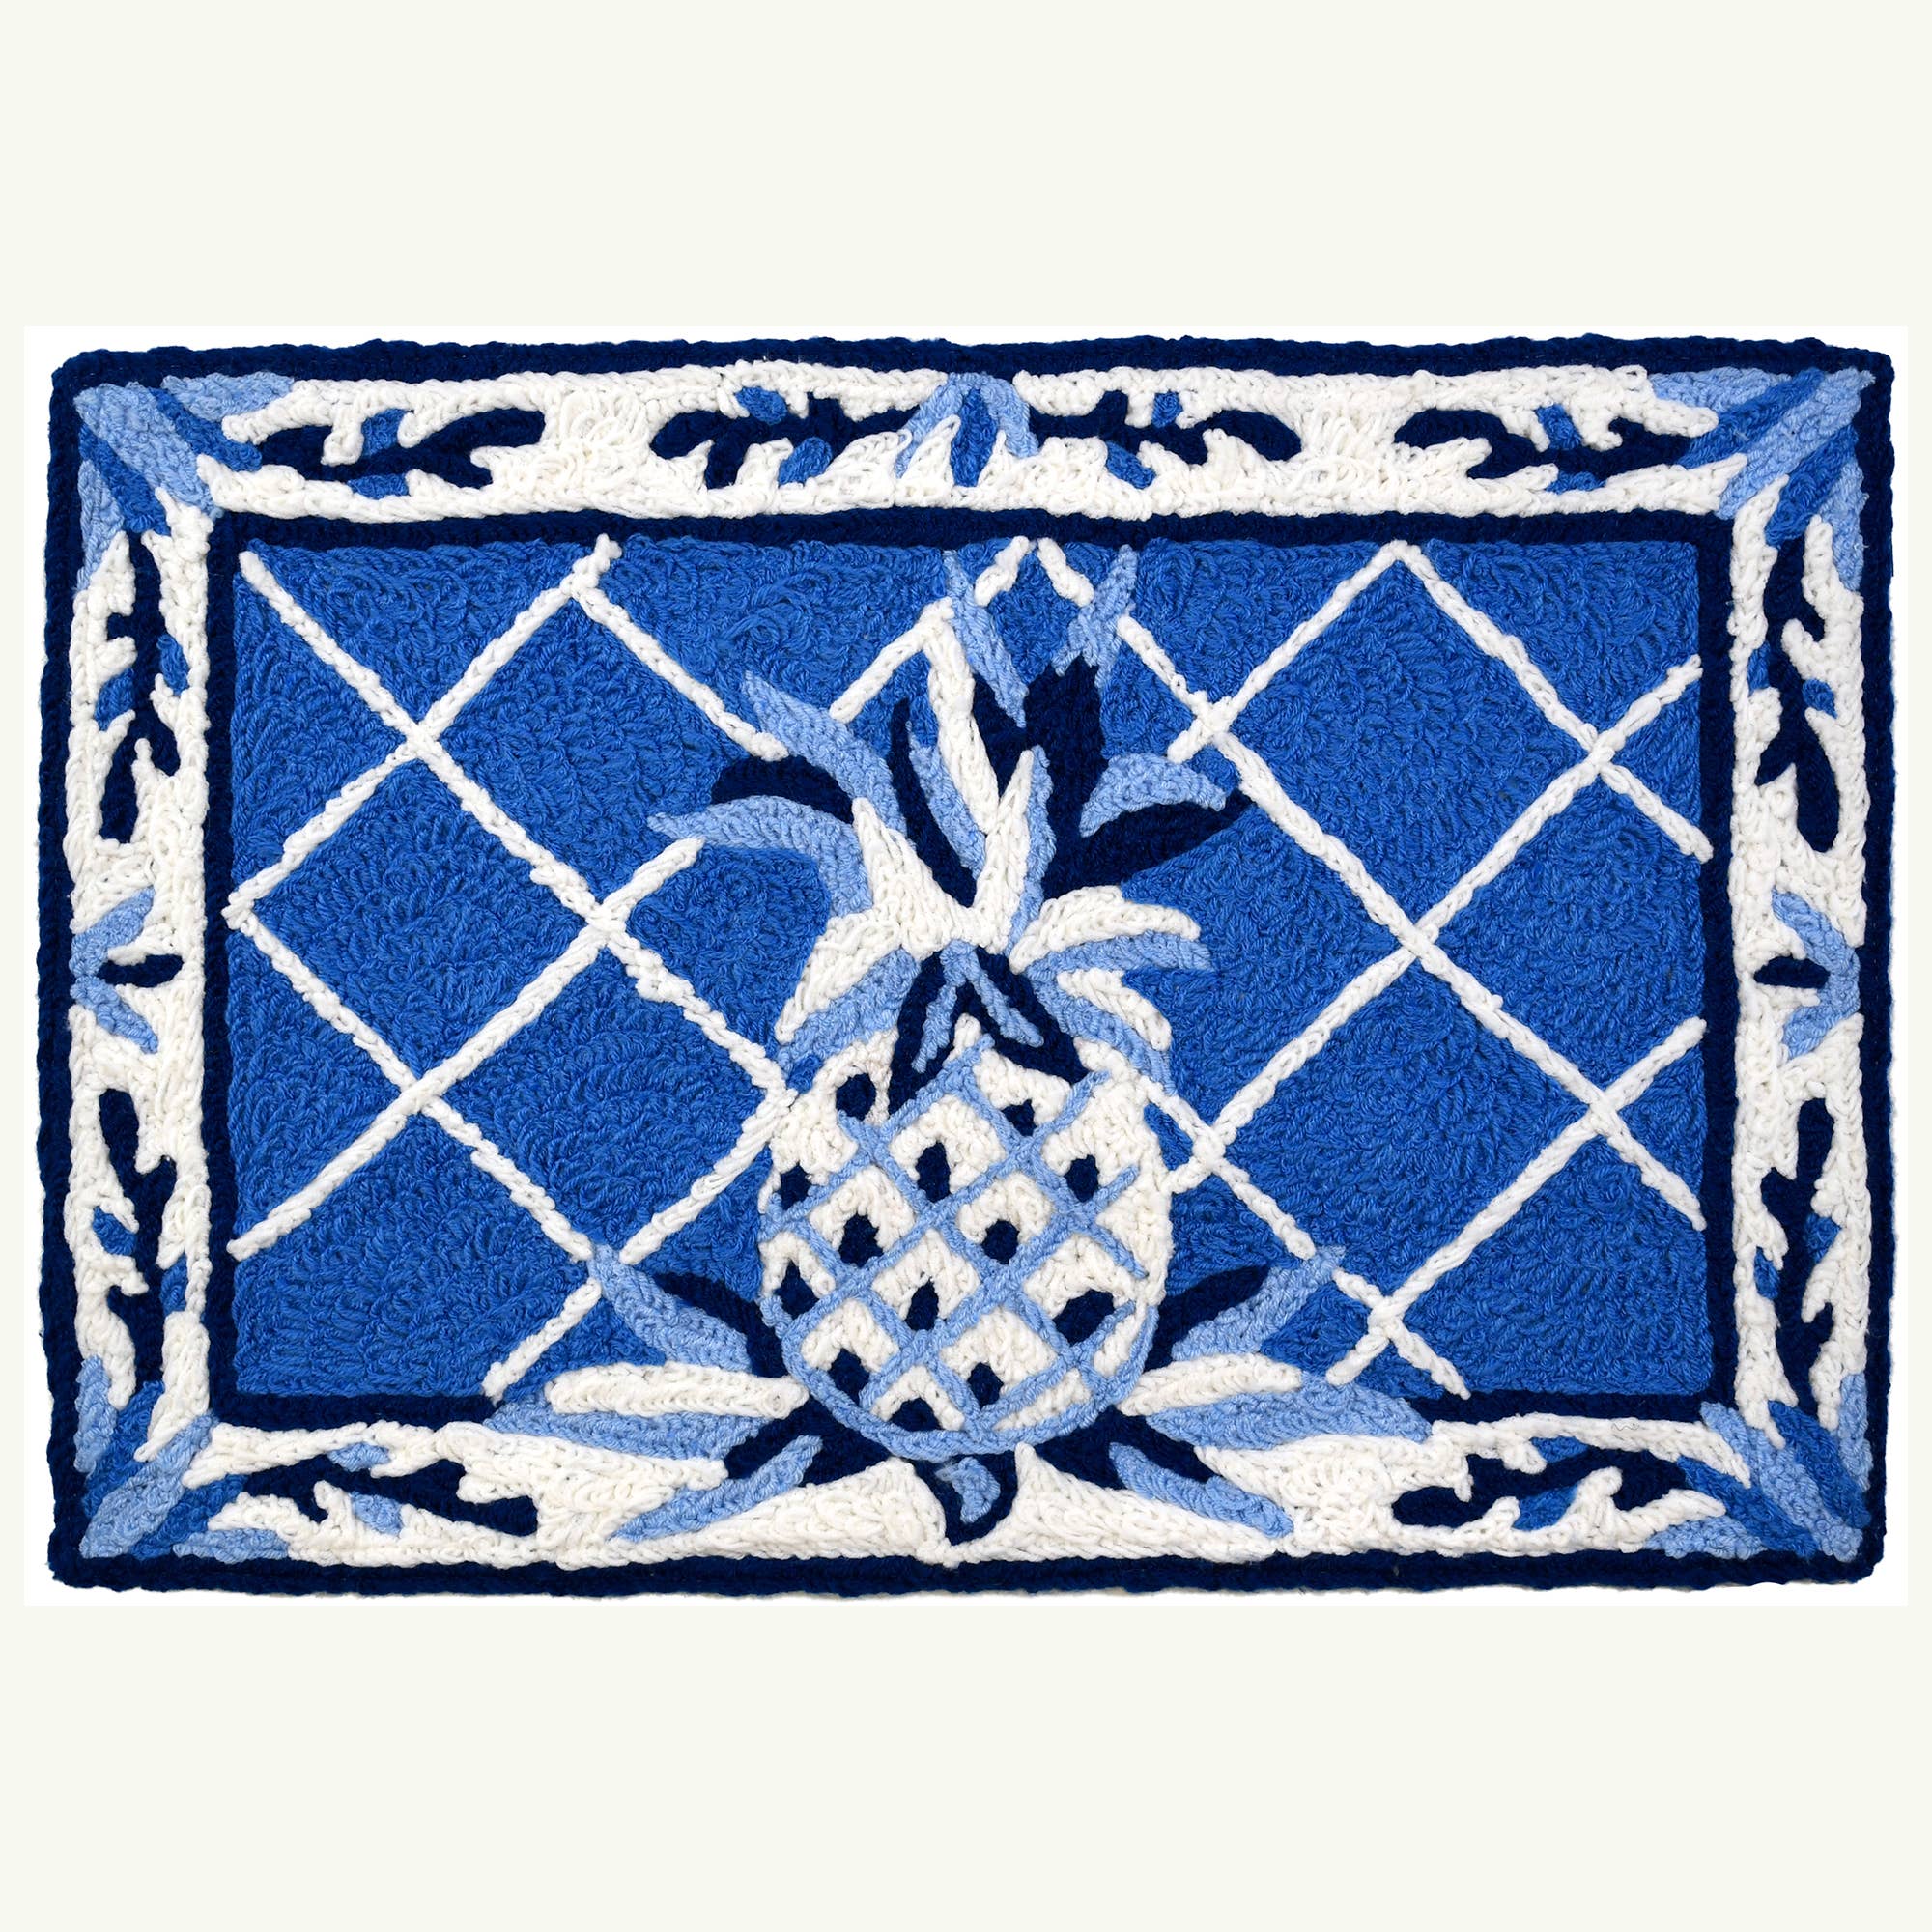 20” x 30” French Country Pineapple Rug